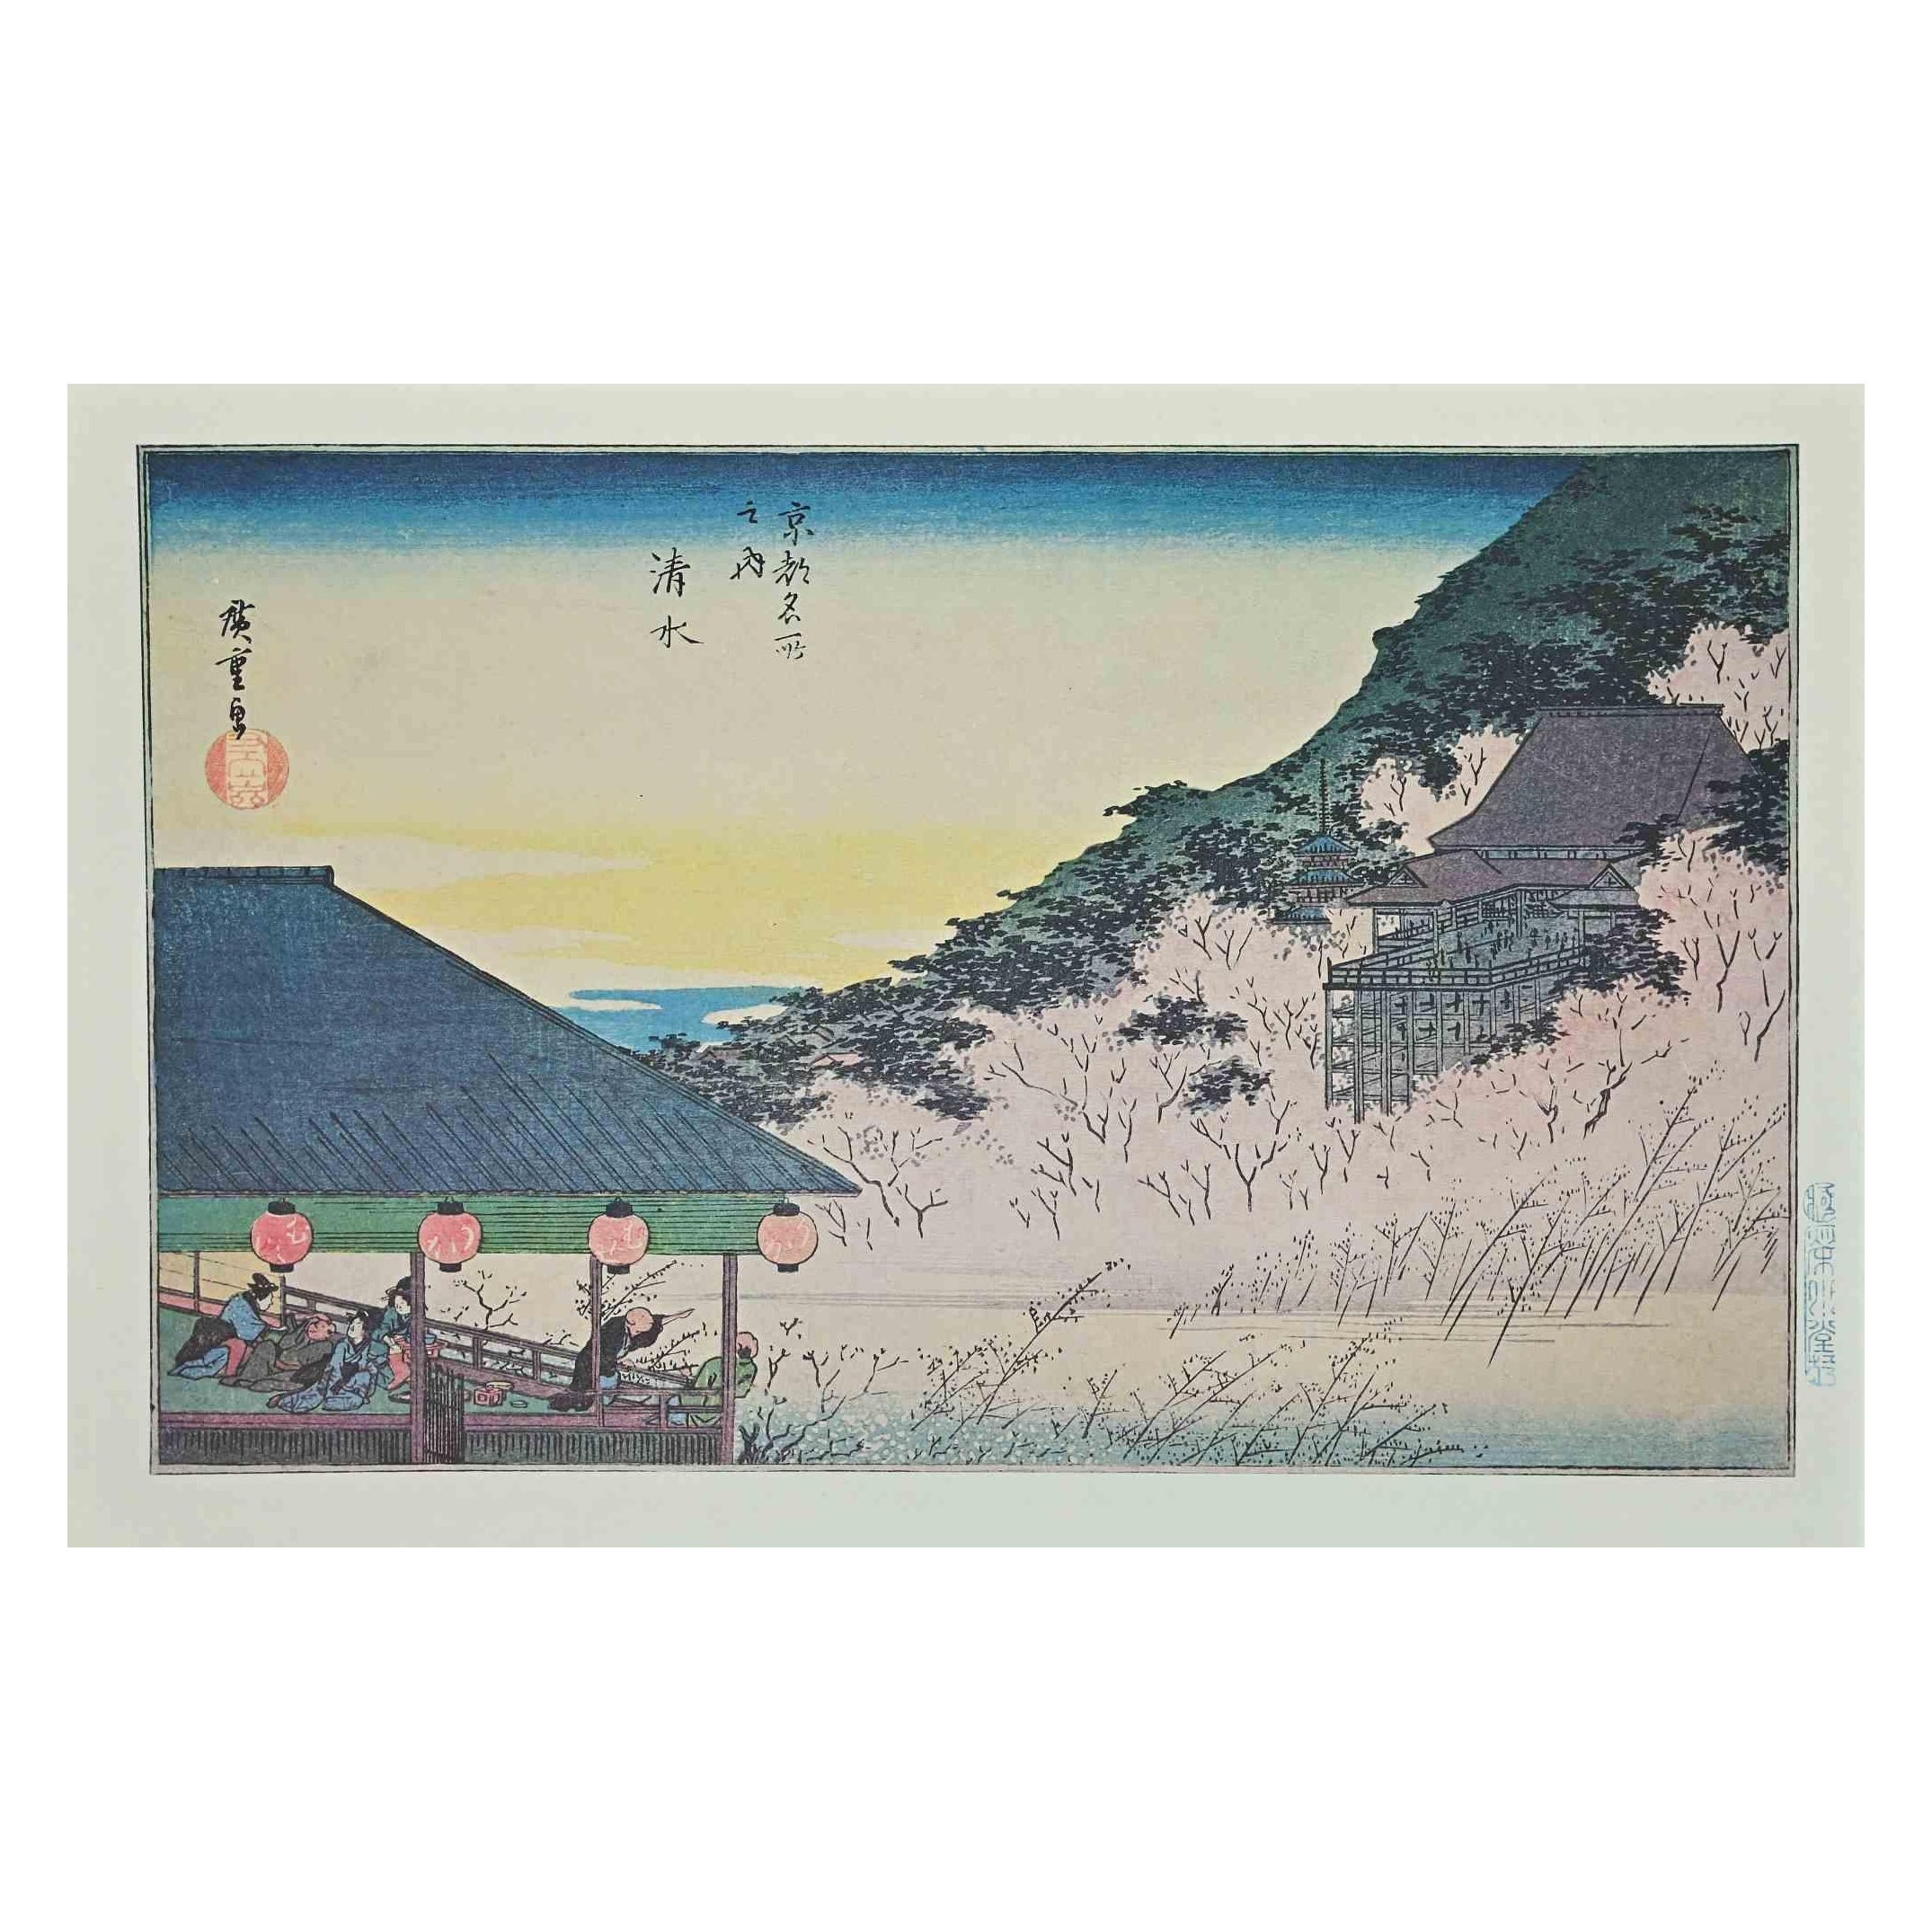 Utagawa Hiroshige Landscape Print - Looking at the Mountain - Scenic Spots in Kyoto 